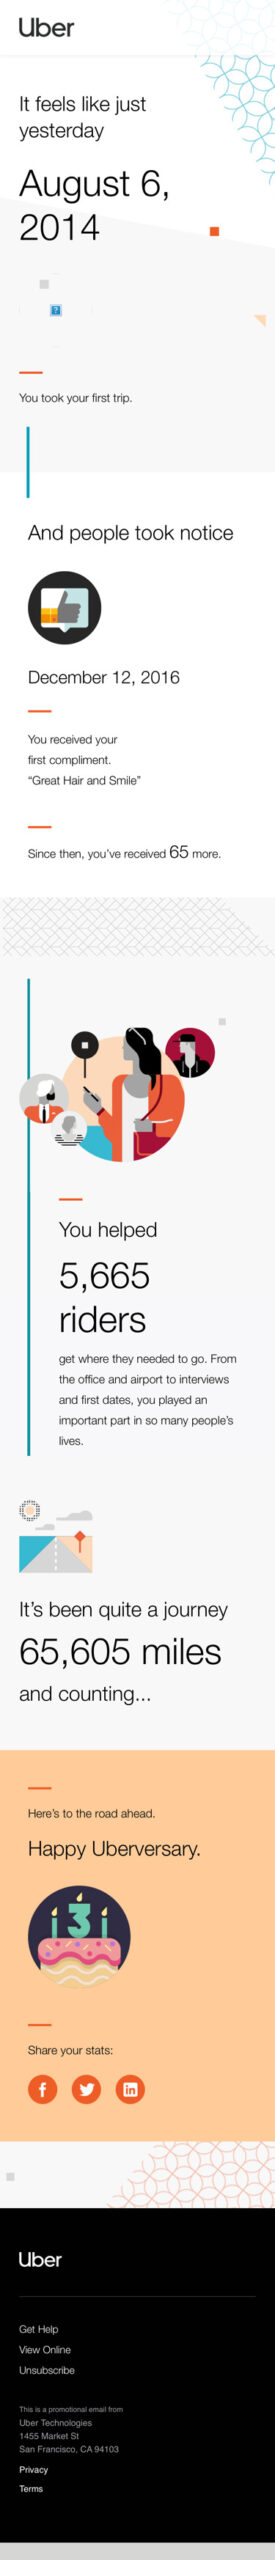 Email from Uber sharing data of how many trips taken, compliments given, and other insights